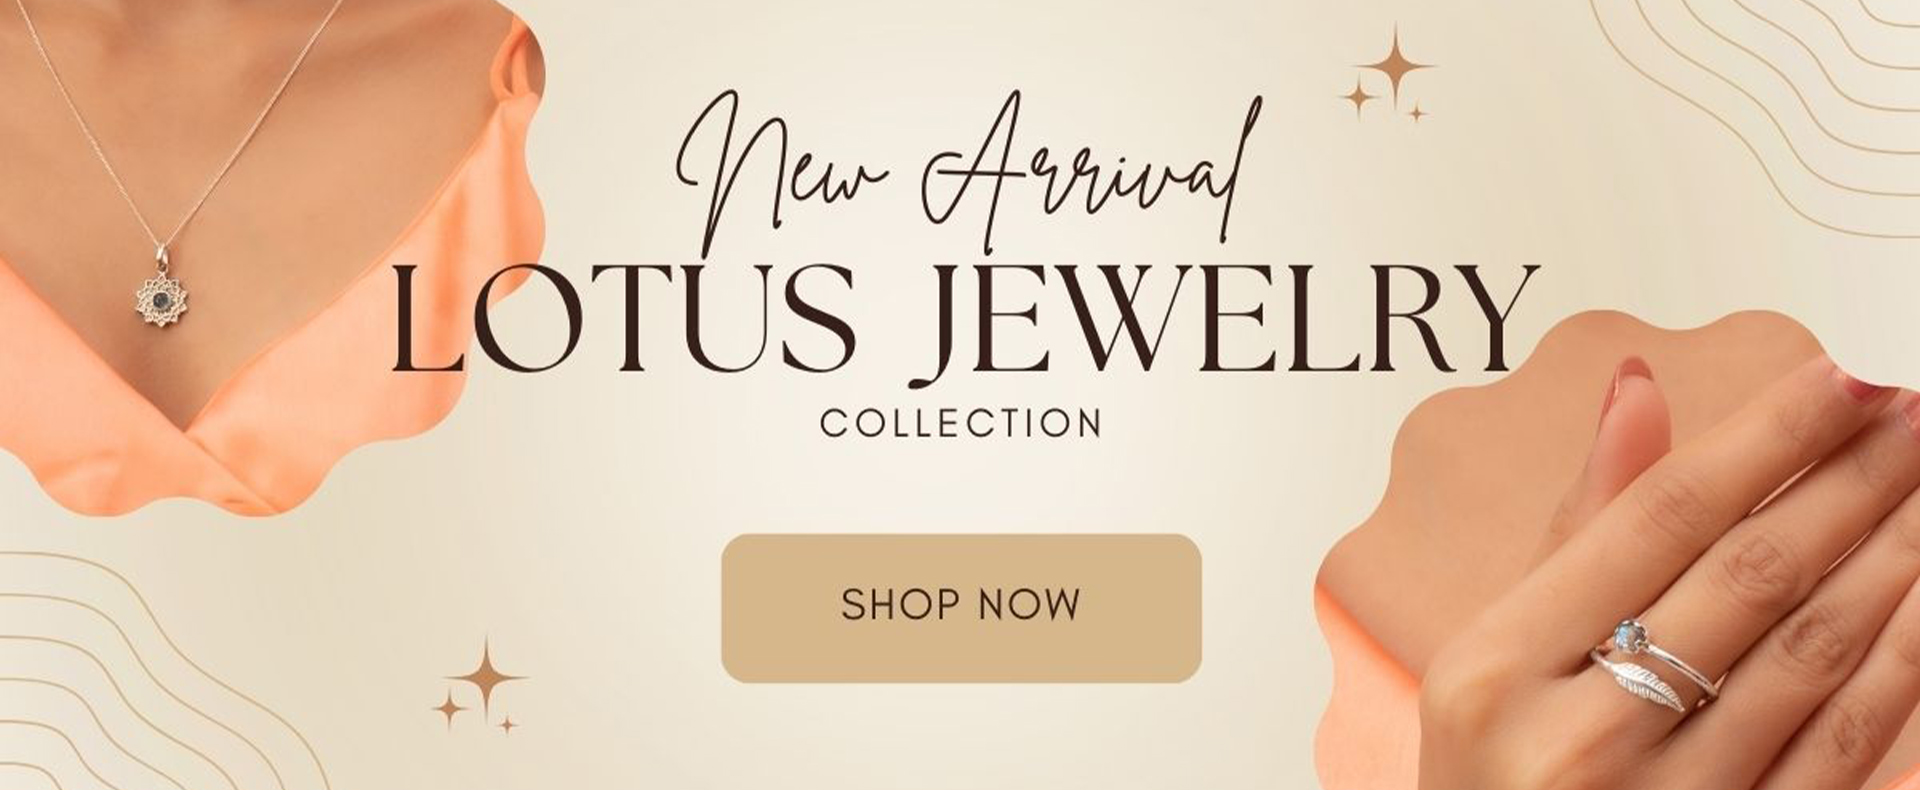 Lotus Jewelry Collection 